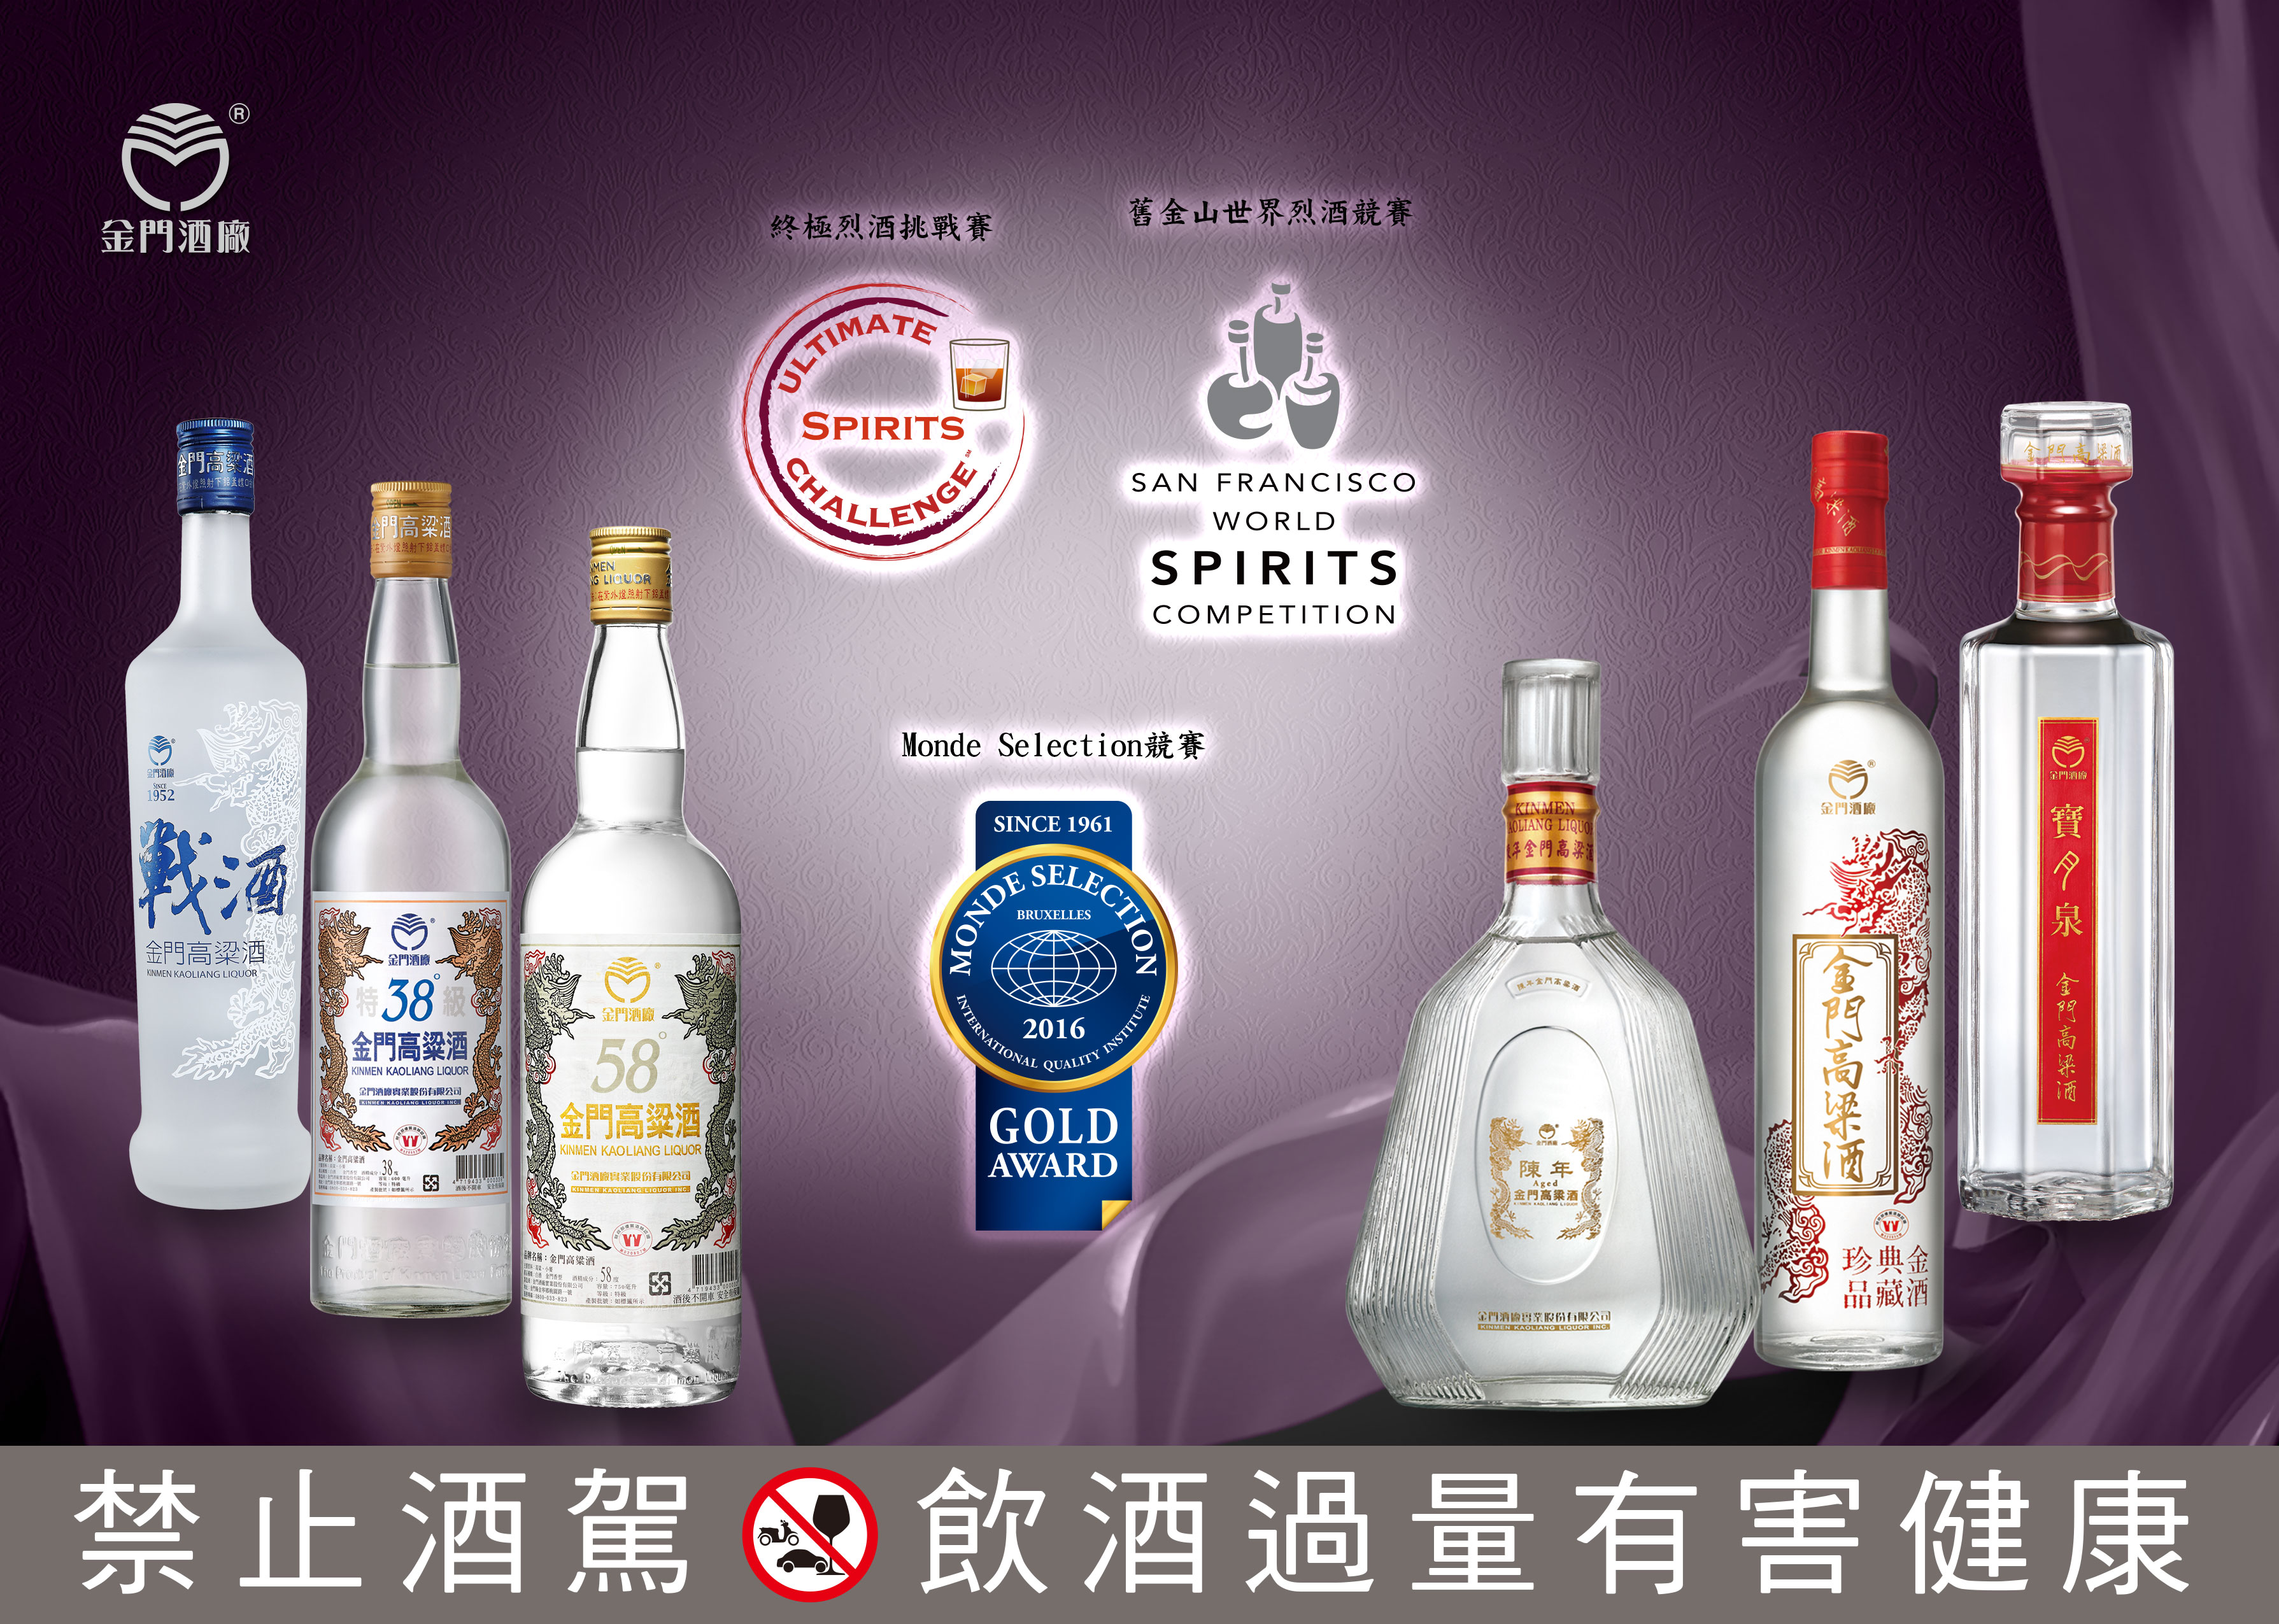 The KKL wins “Best Baijiu” titles from the world’s three major spirits competitions in 2016